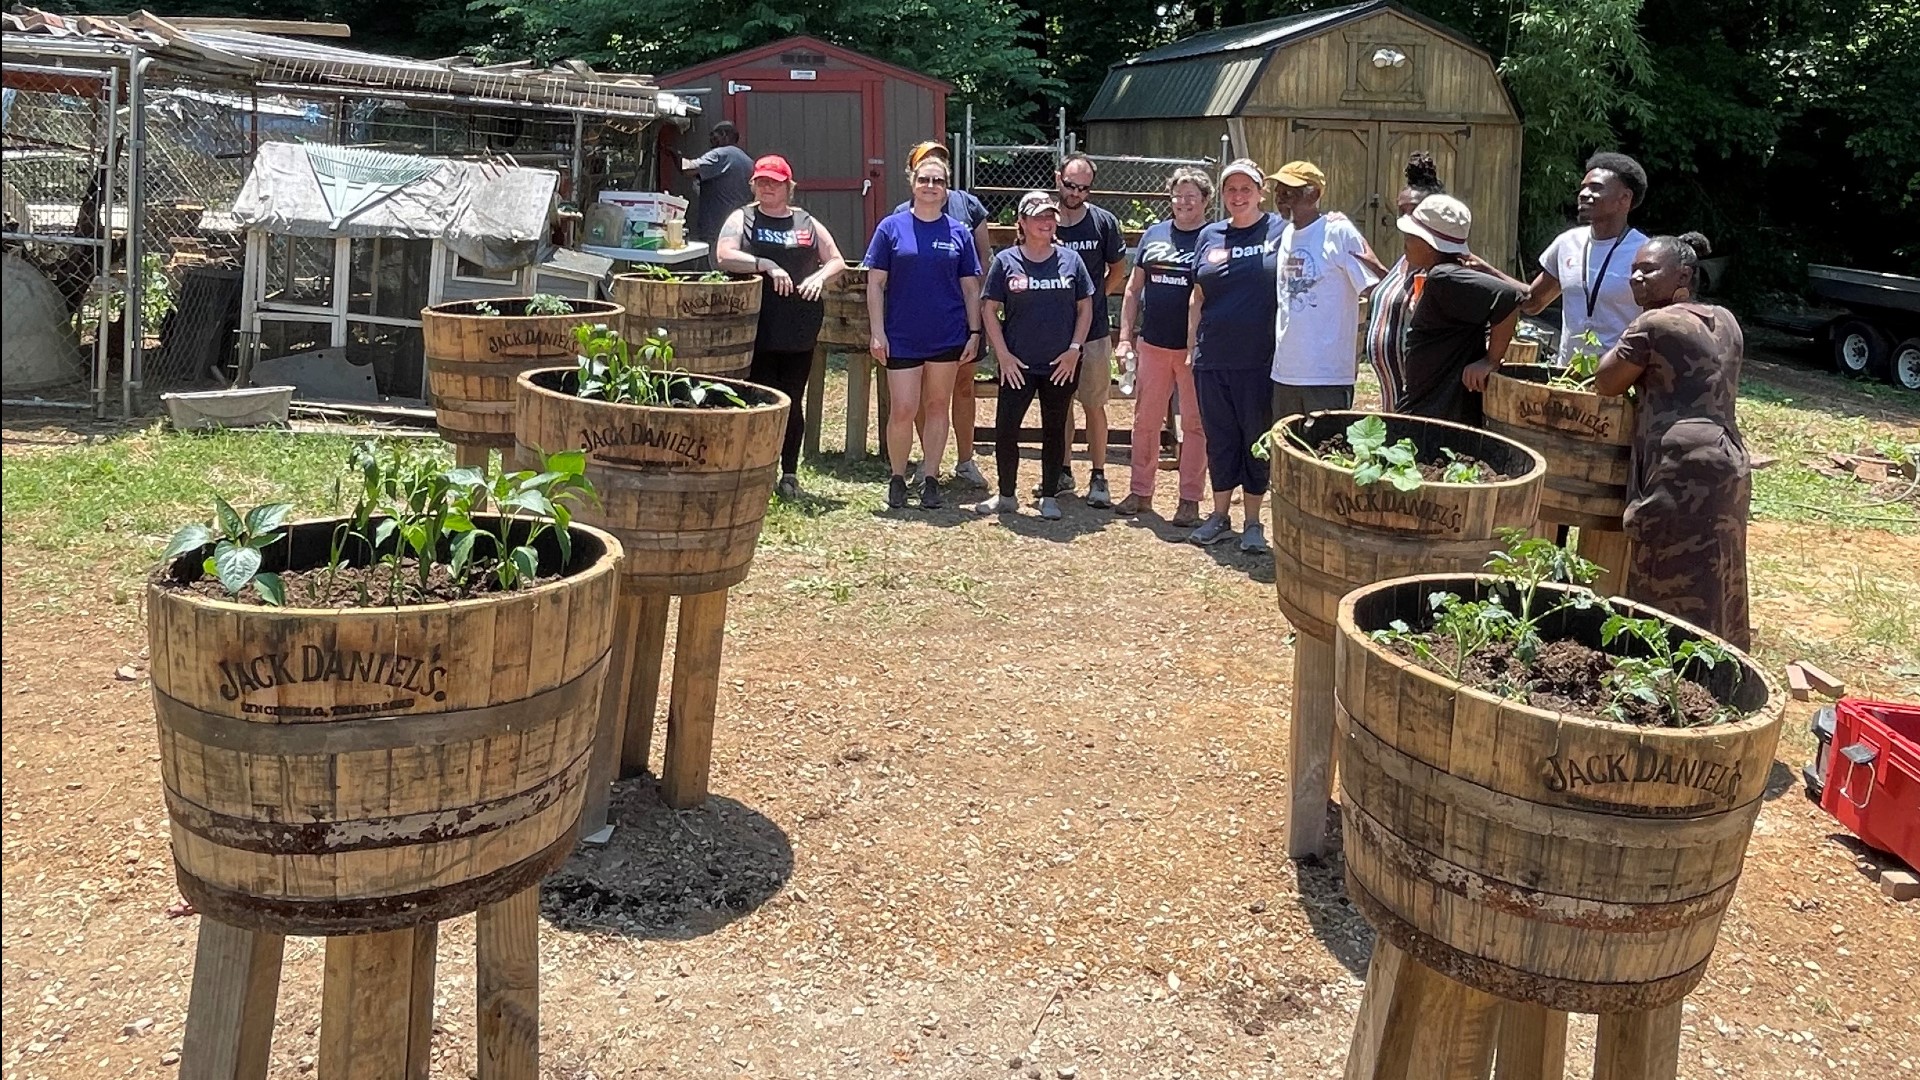 A homegrown charity in East Tennessee builds free gardens for veterans and first responders.